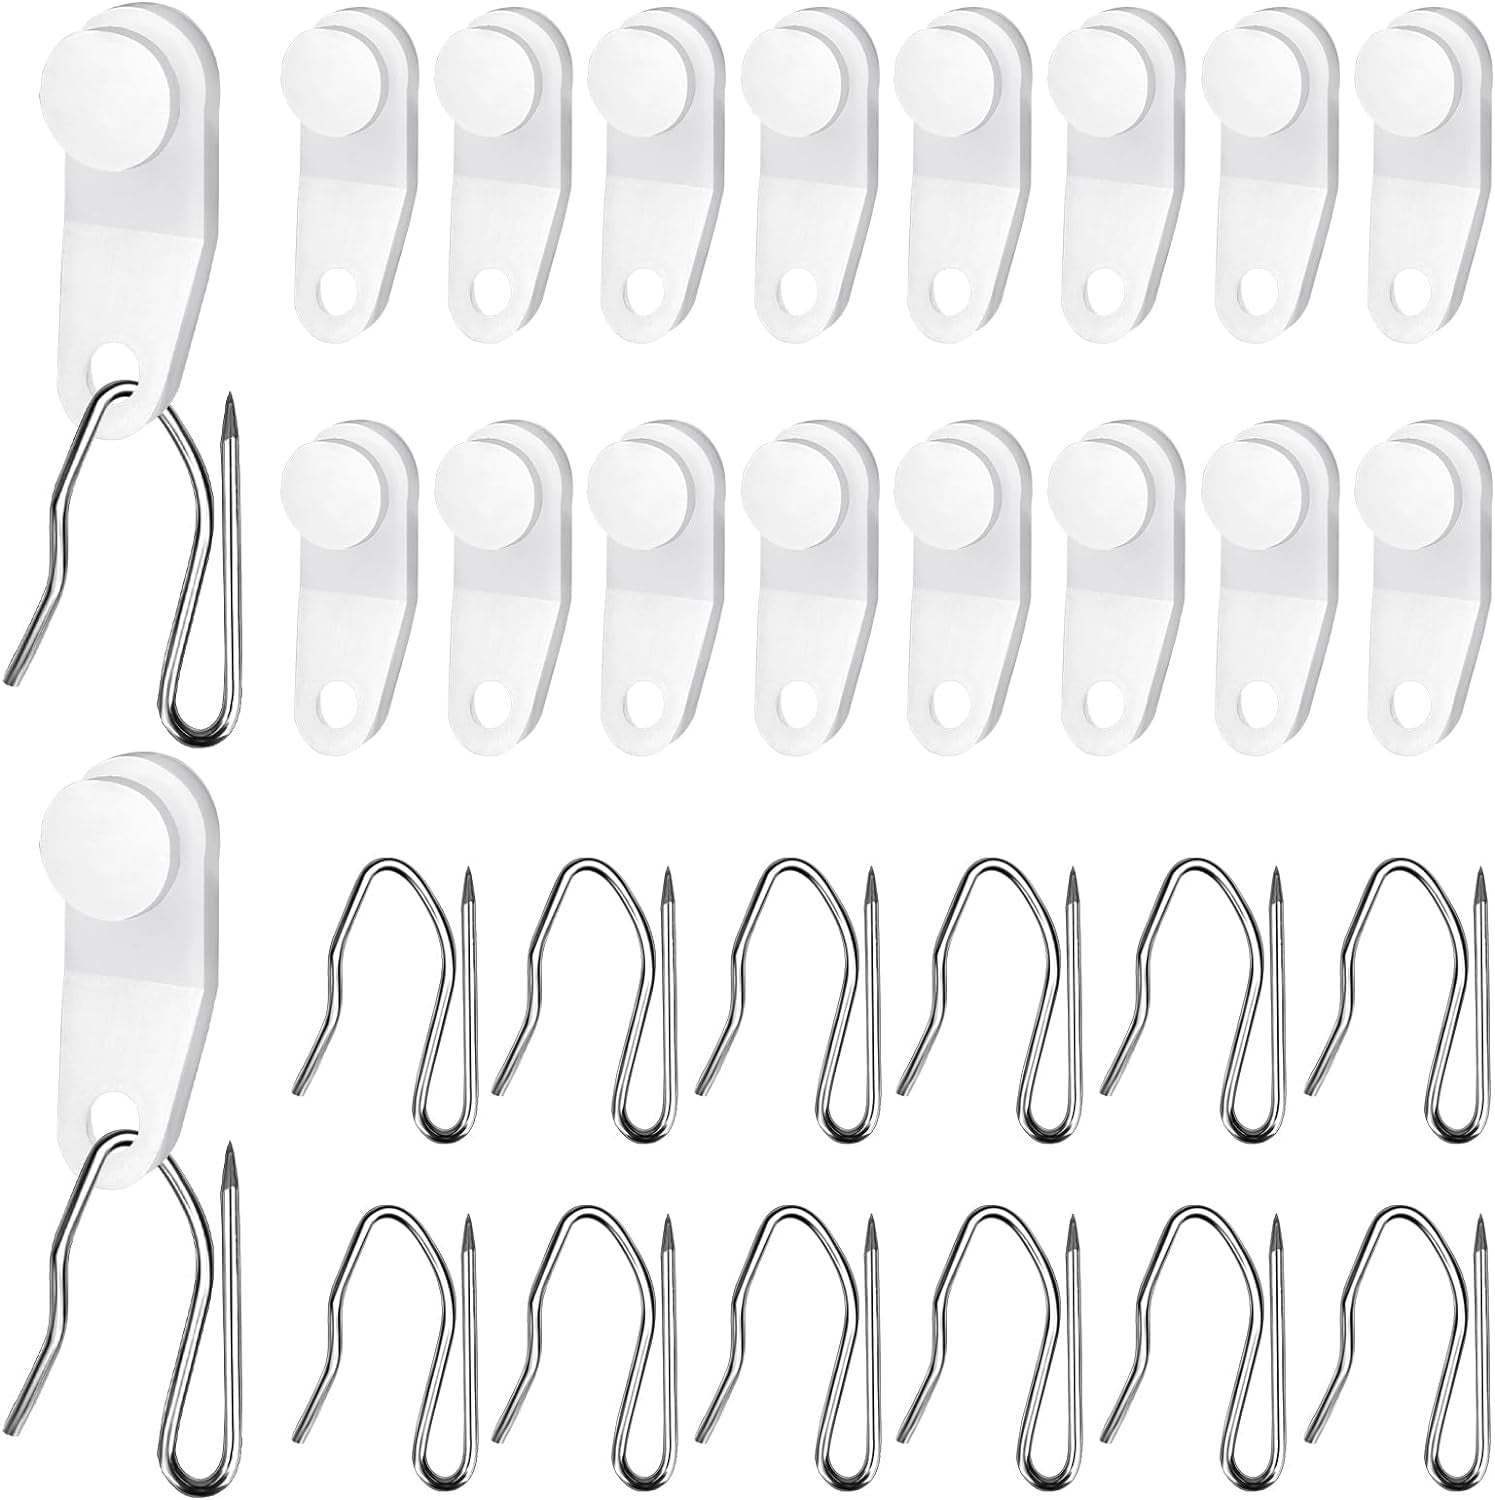 50Sets White Traverse Rod Slides Curtain Track Glider Hooks for Curtains, Drapery Hook for Curtains Traverse Curtain Rods Accessories, Plastic Curtain Hooks and Metal Curtain Hooks Window Curtain